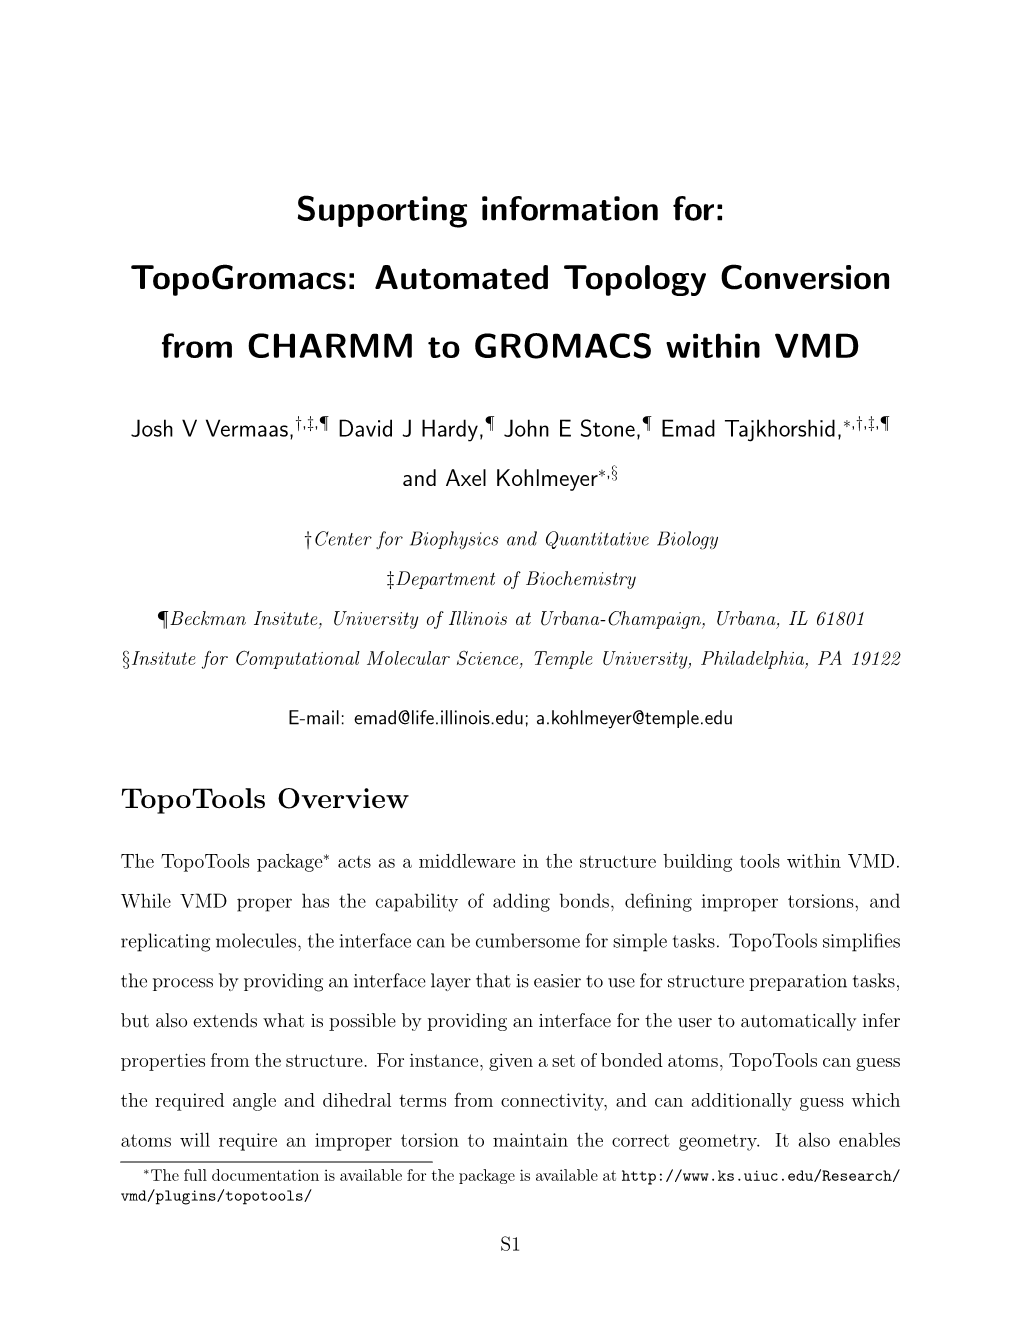 Automated Topology Conversion from CHARMM to GROMACS Within VMD